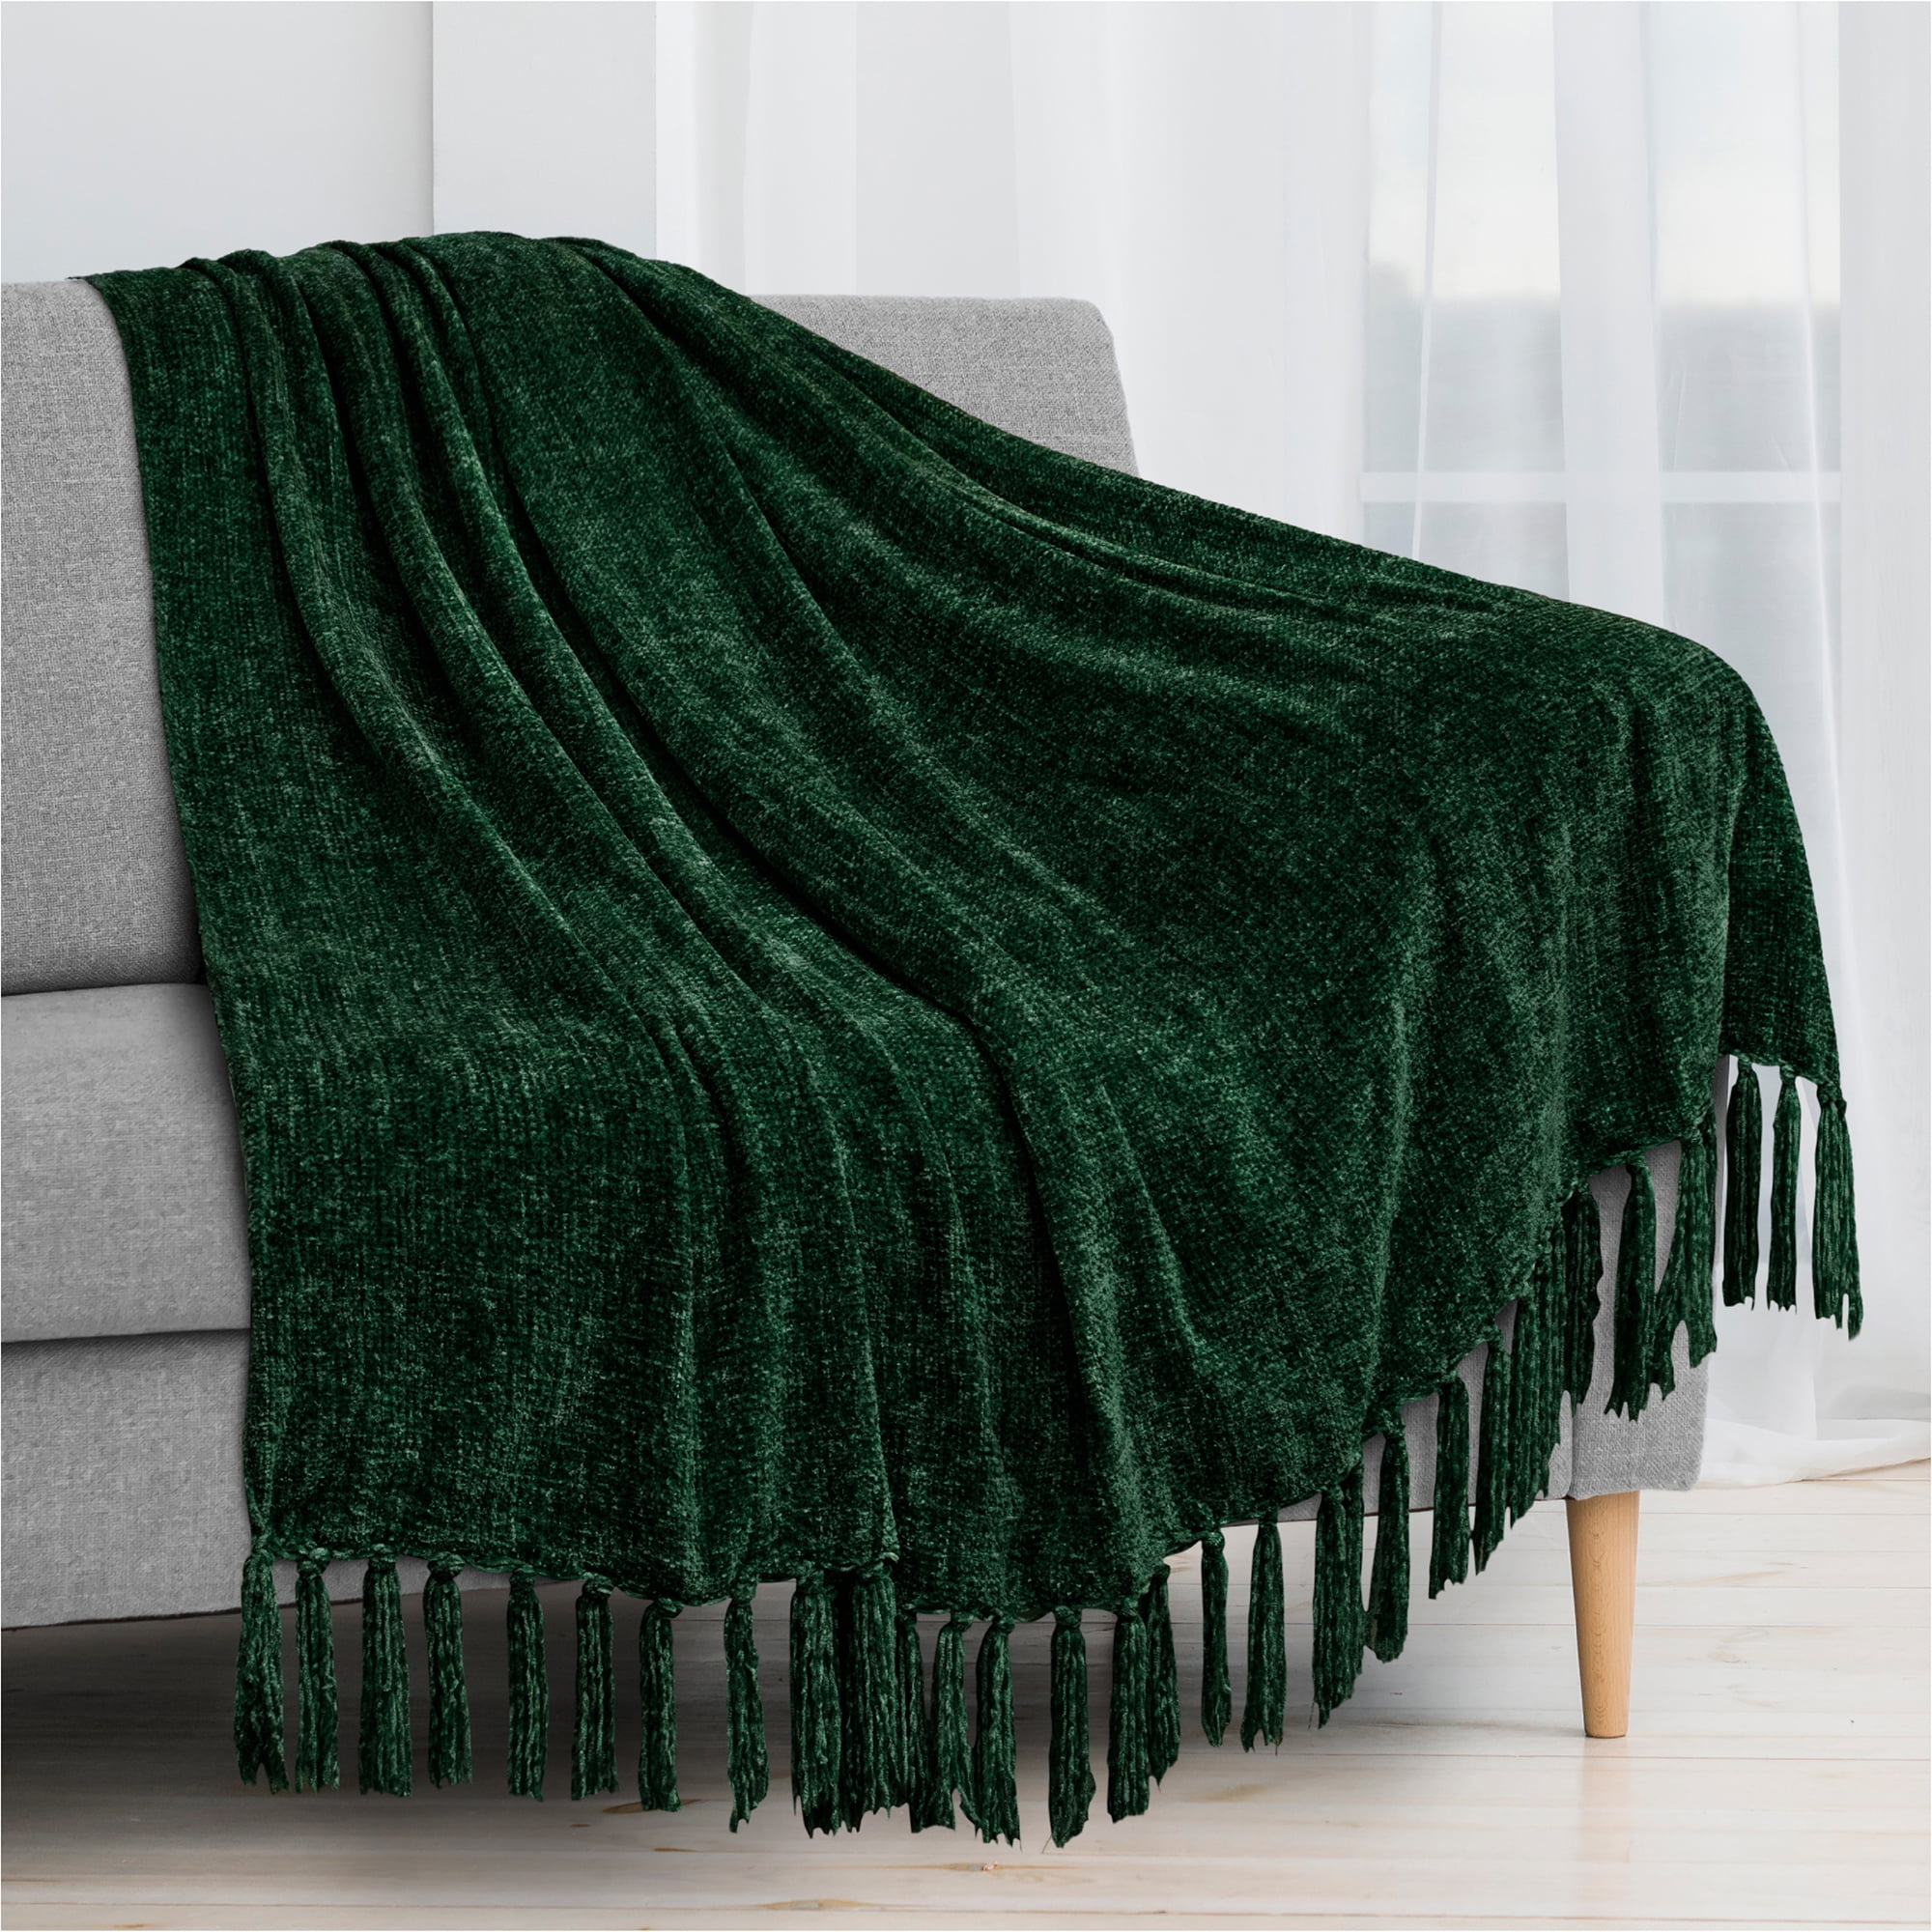 Details about   Fluffy Chenille Knitted Throw Blanket Decorative Fringe Sofa Couch Chair 60 x 50 